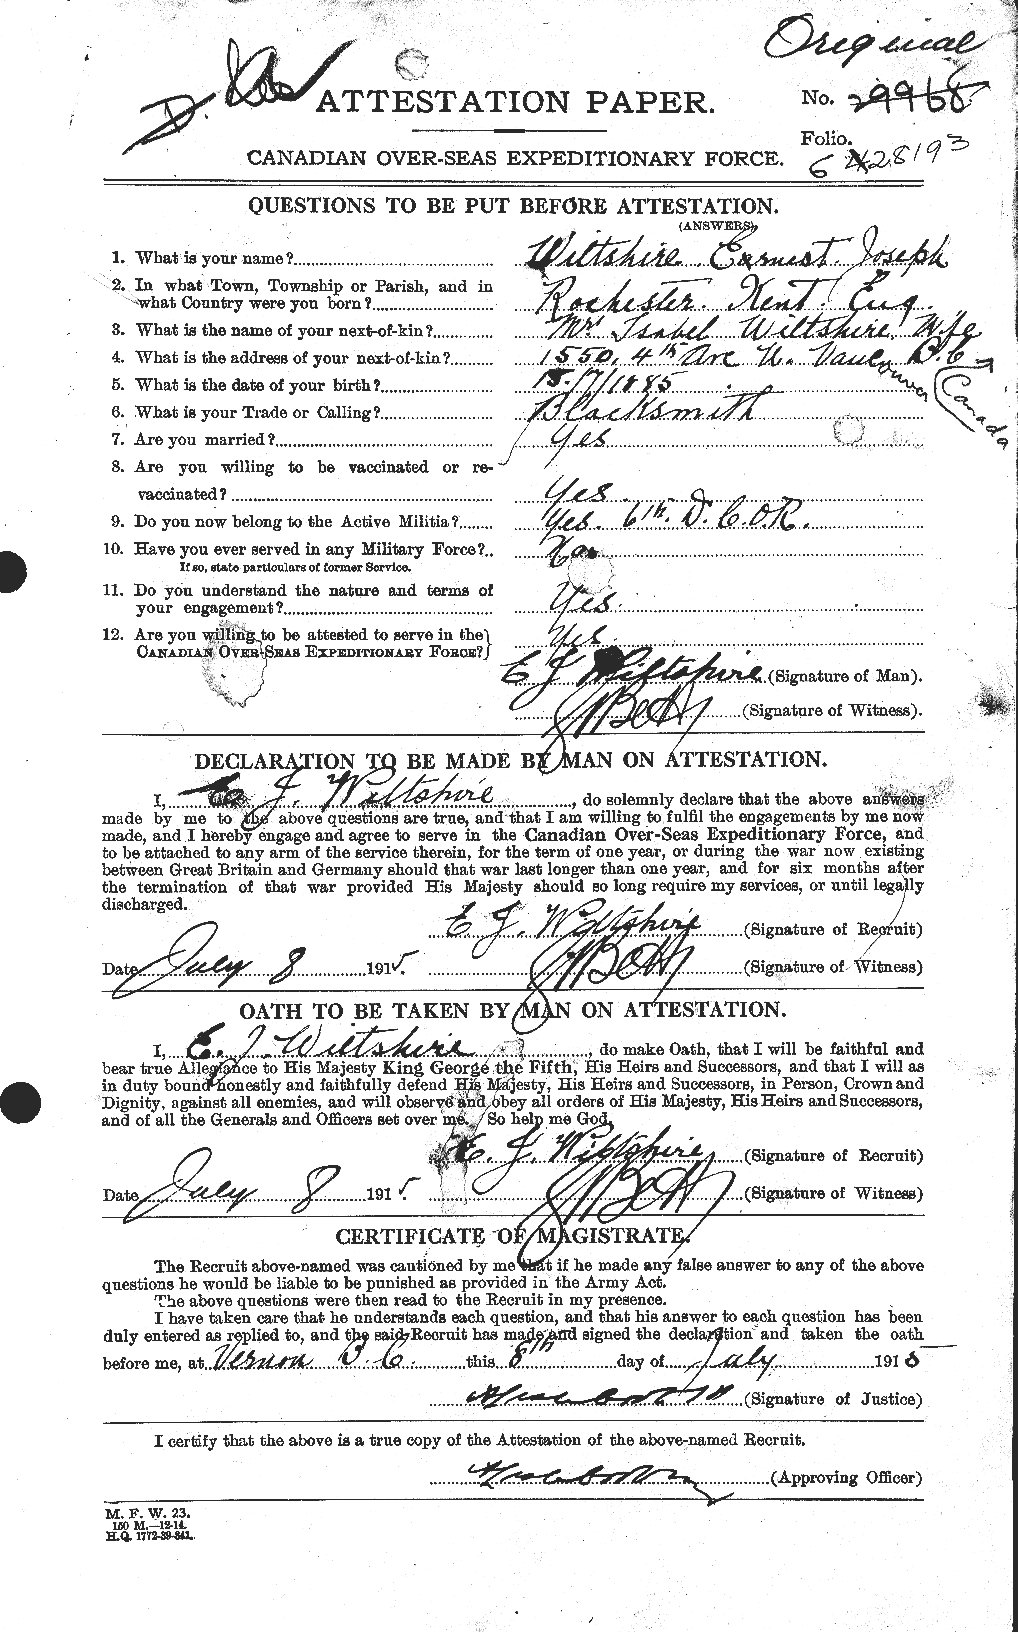 Personnel Records of the First World War - CEF 667137a